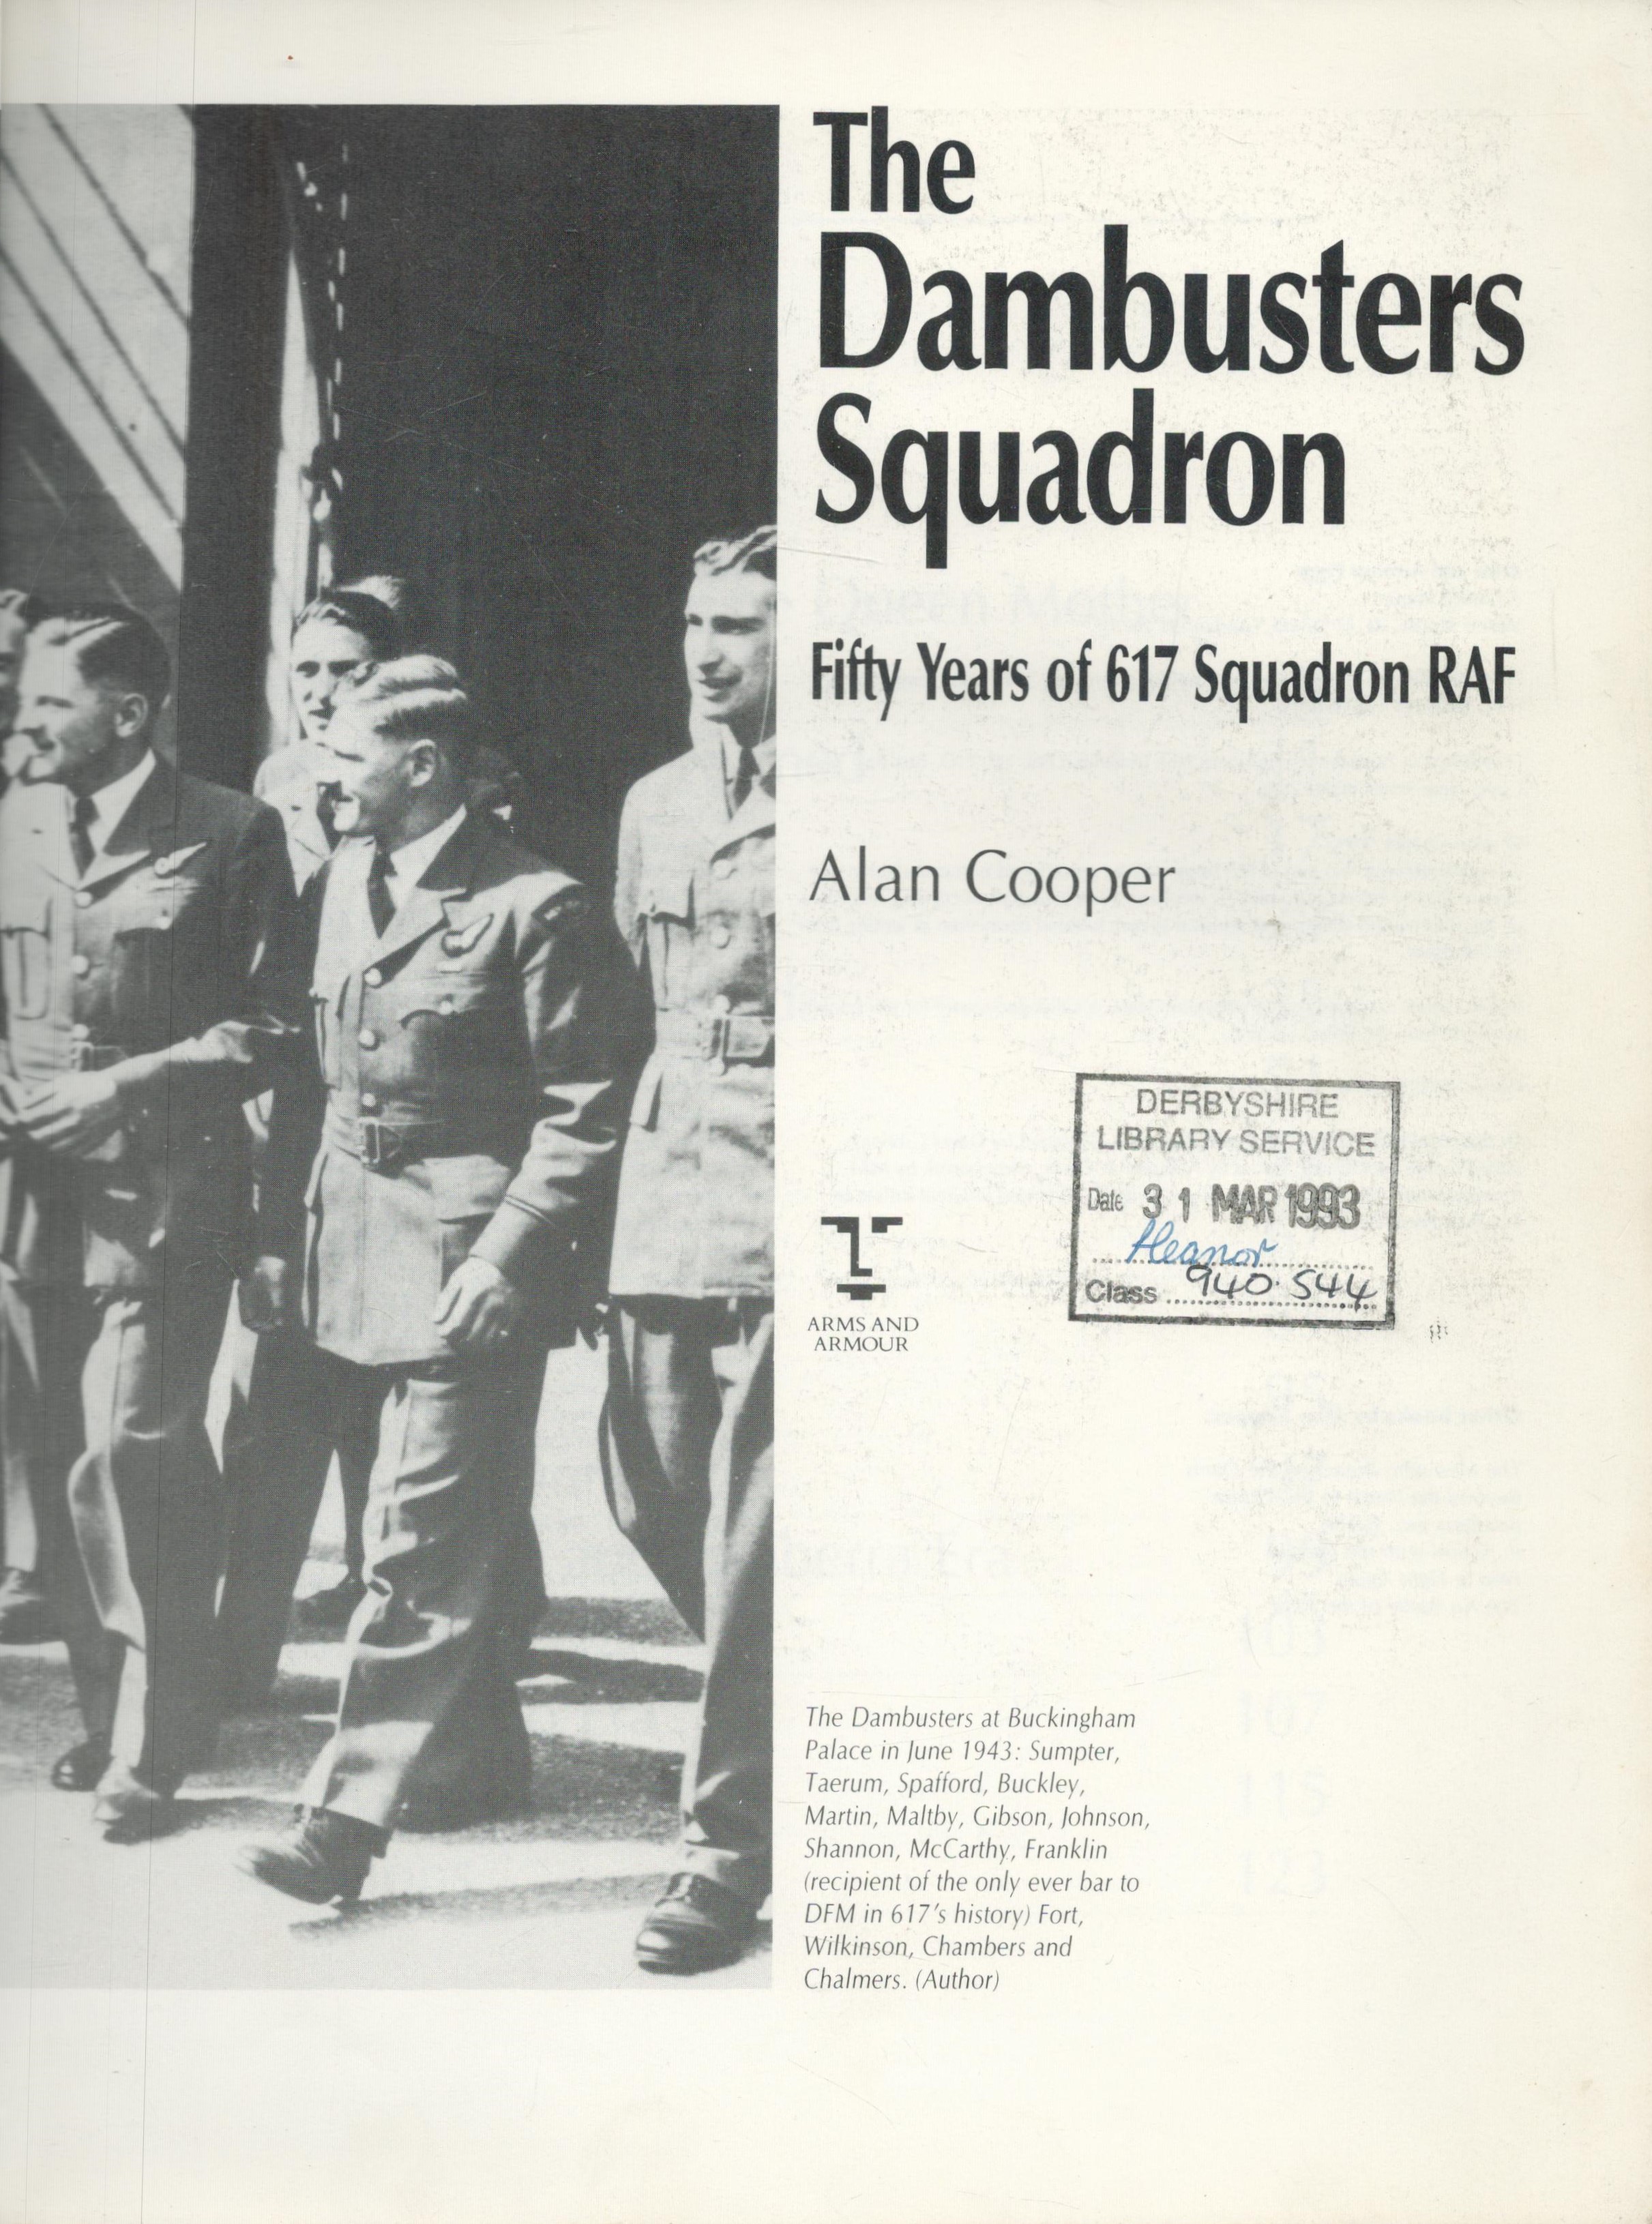 Alan Cooper Paperback Book Titled The Dambuster Squadron- 50 Years of 617 Squadron RAF. Foreword - Image 2 of 3